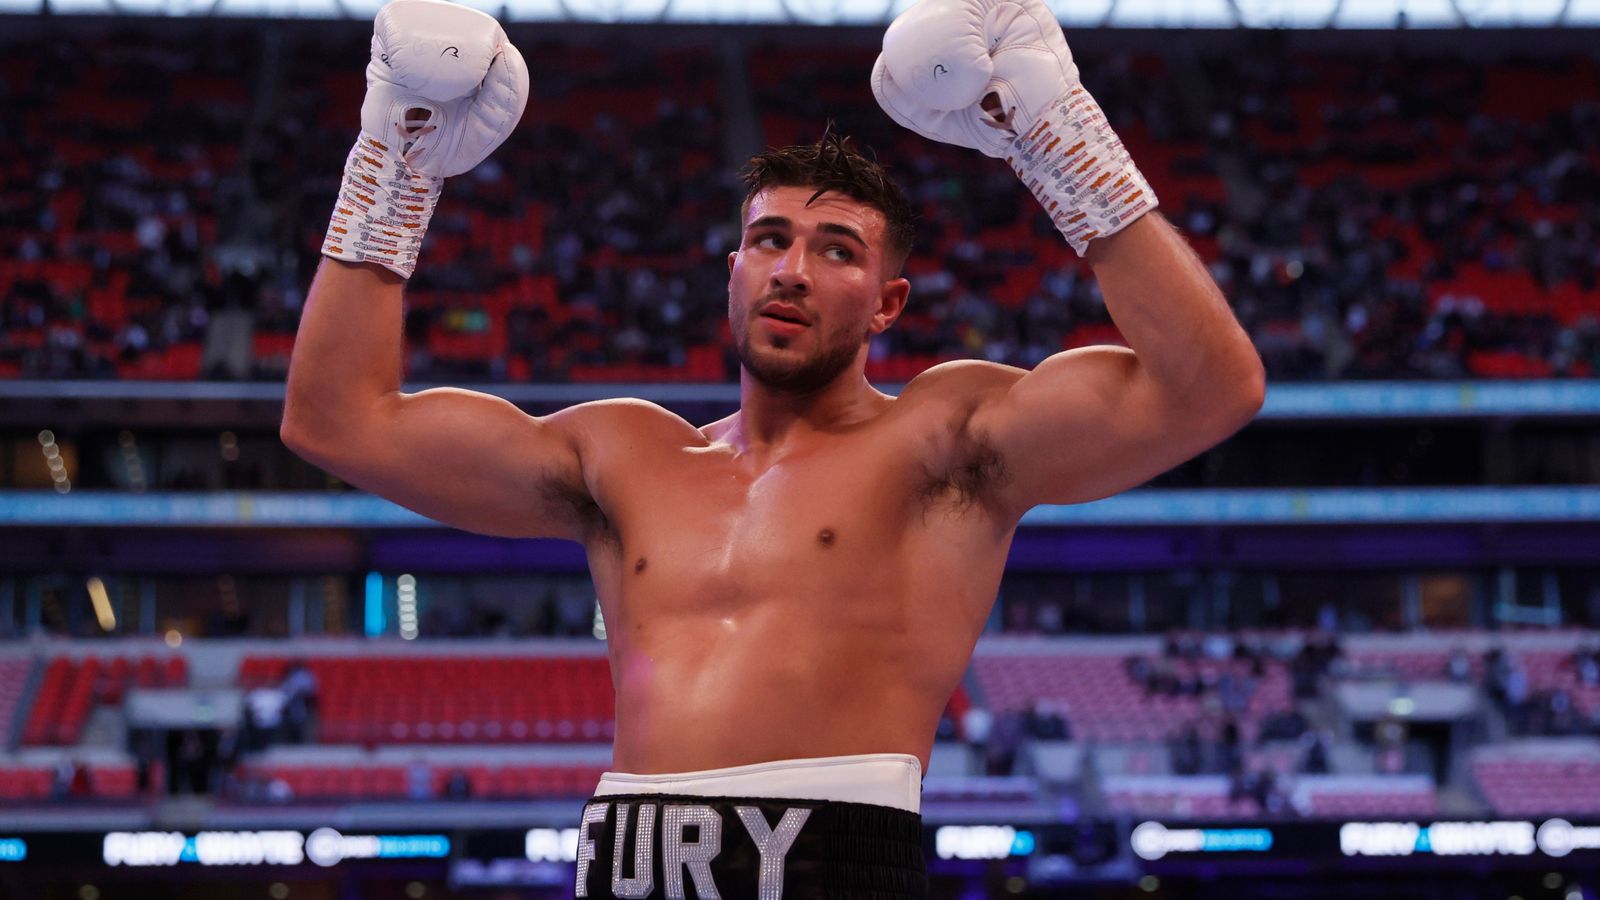 Jake Paul v Tommy Fury When is the fight billed as 'The Truth' and how